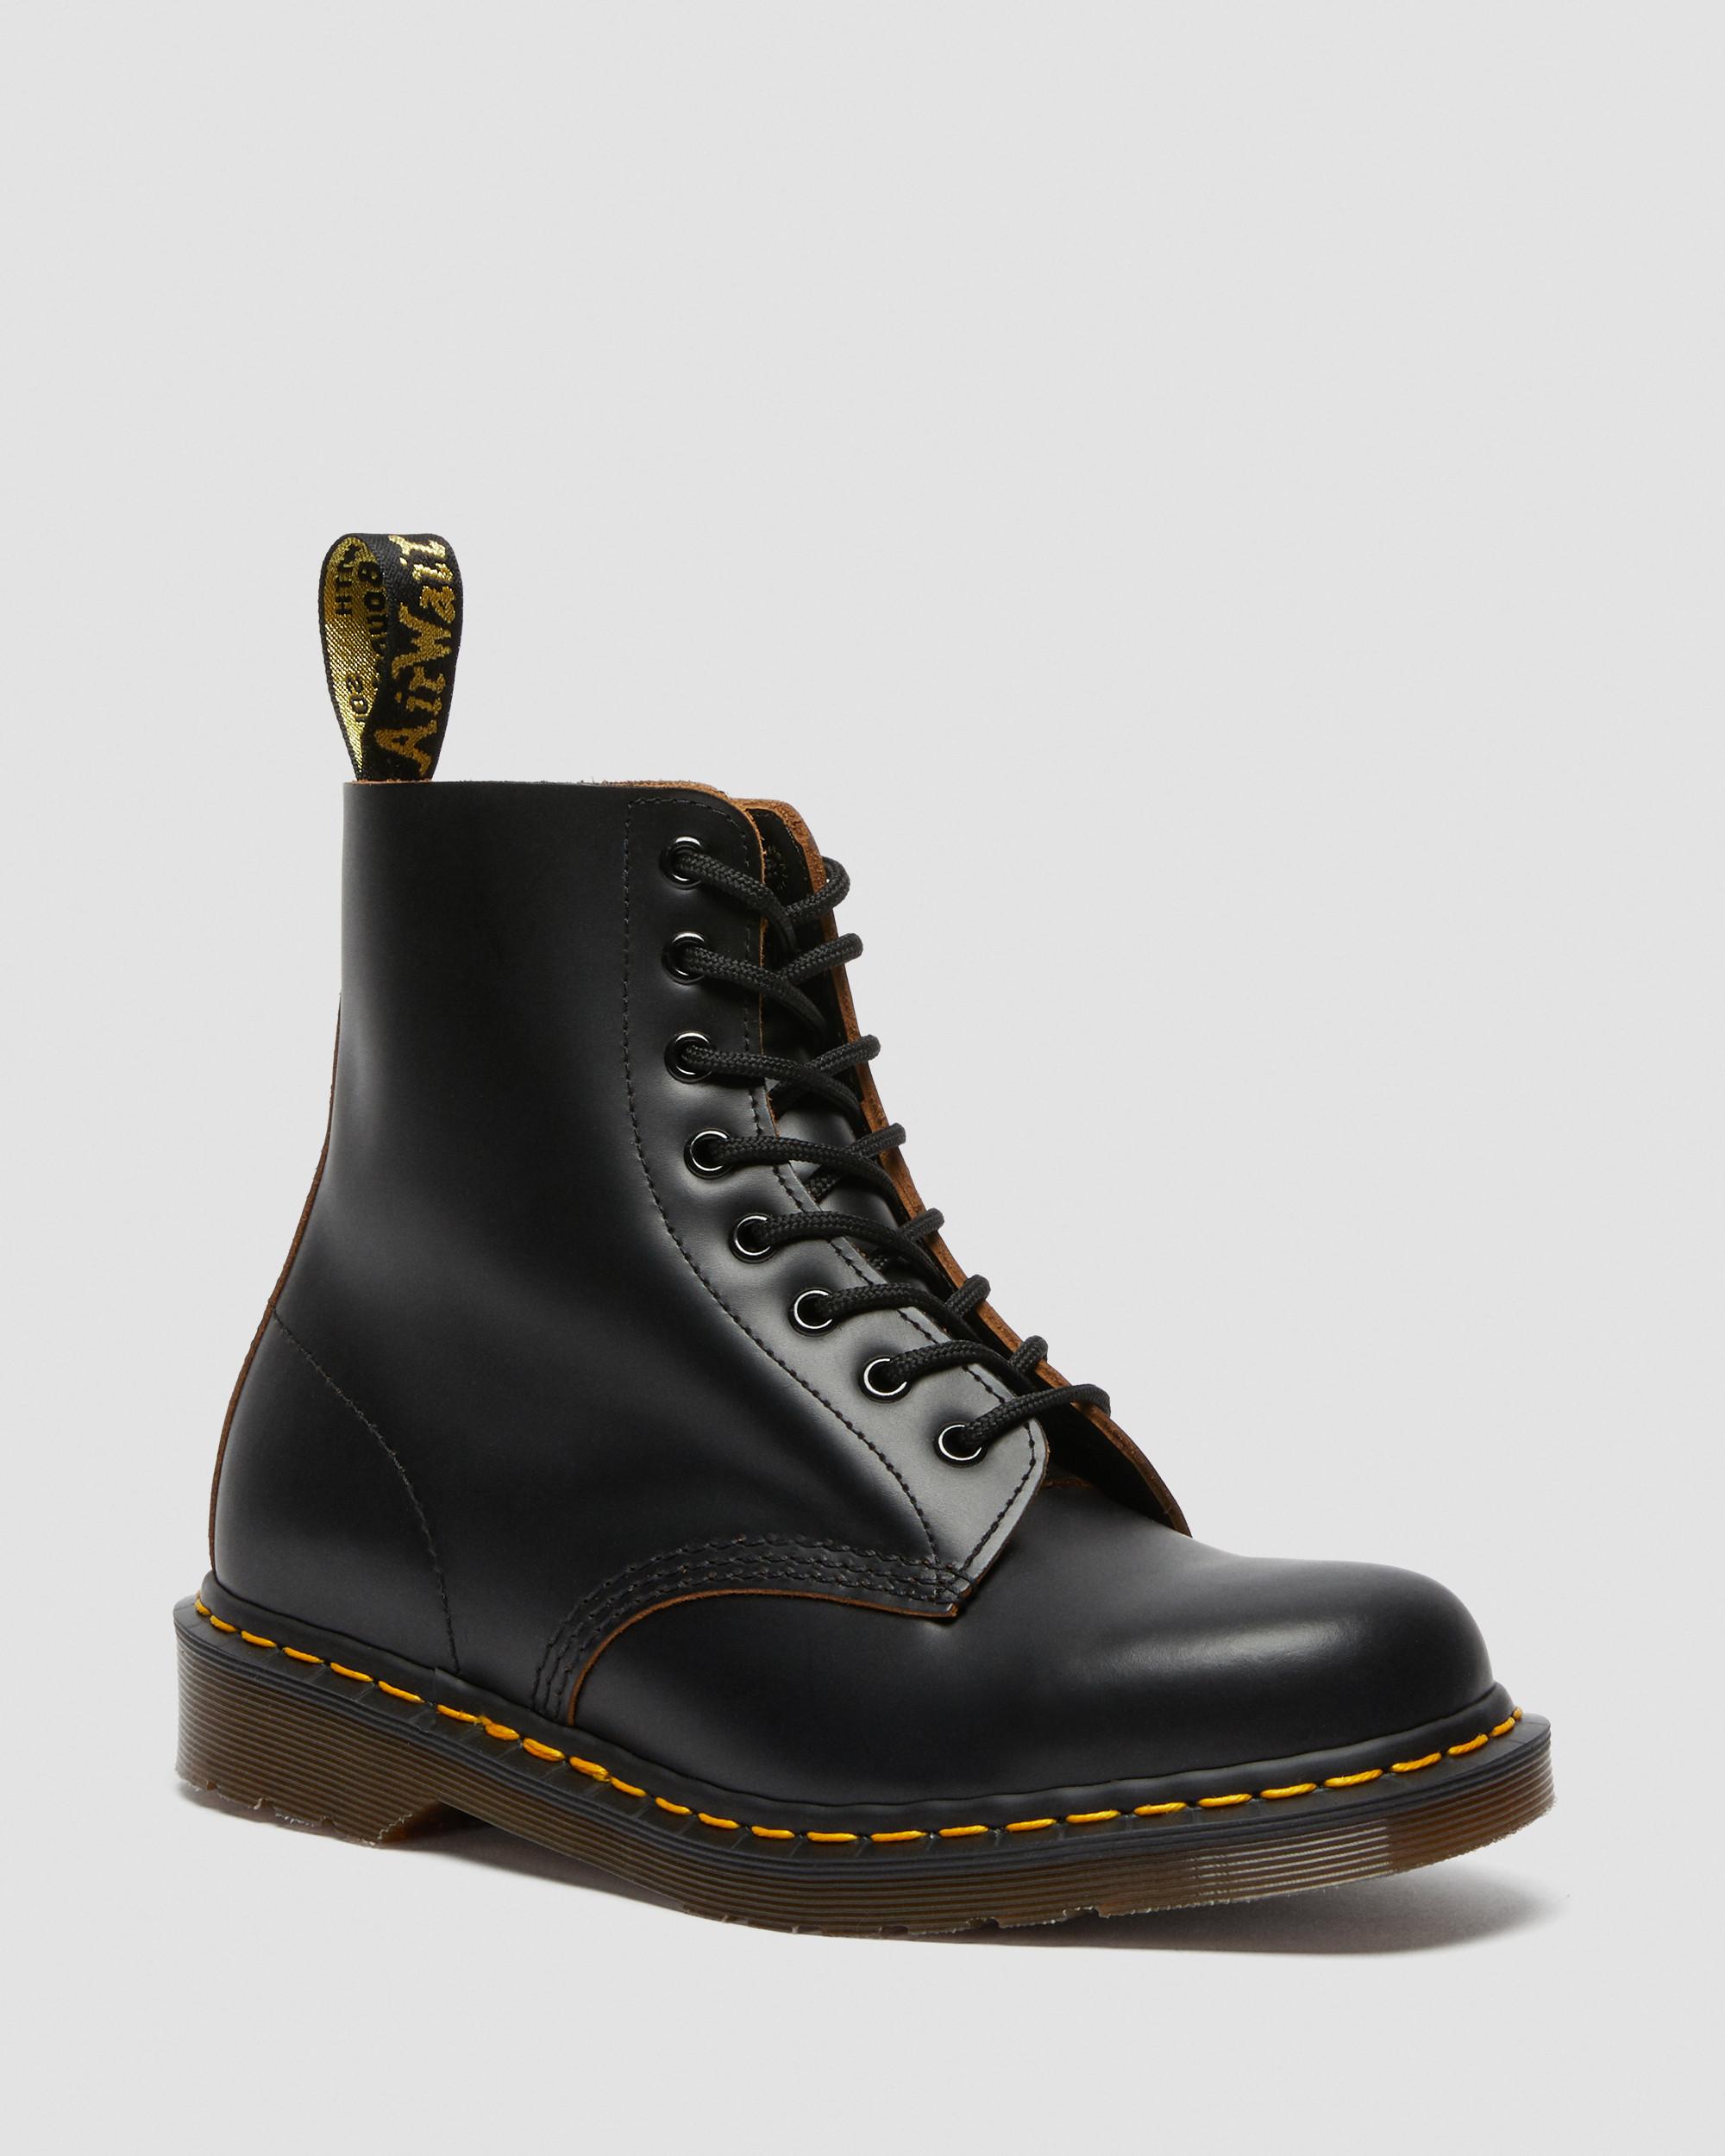 who makes dr martens